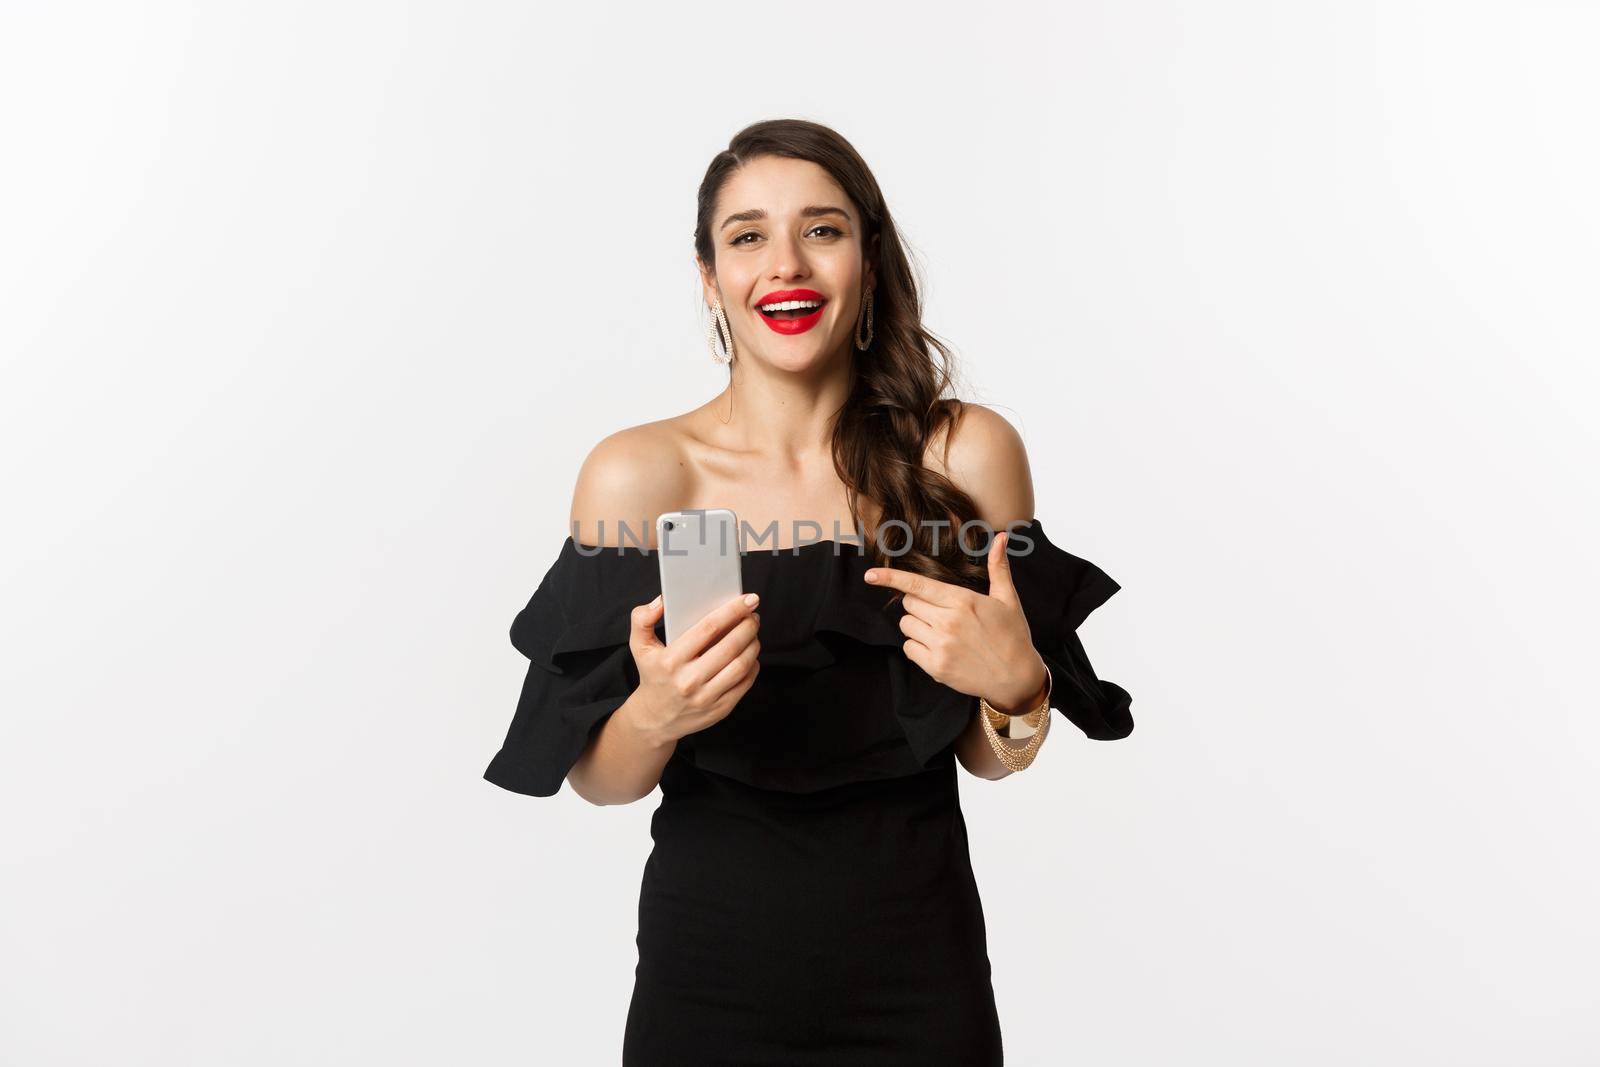 Online shopping concept. Satisfied pretty woman in black dress, smiling pleased and pointing at mobile phone, standing over white background.